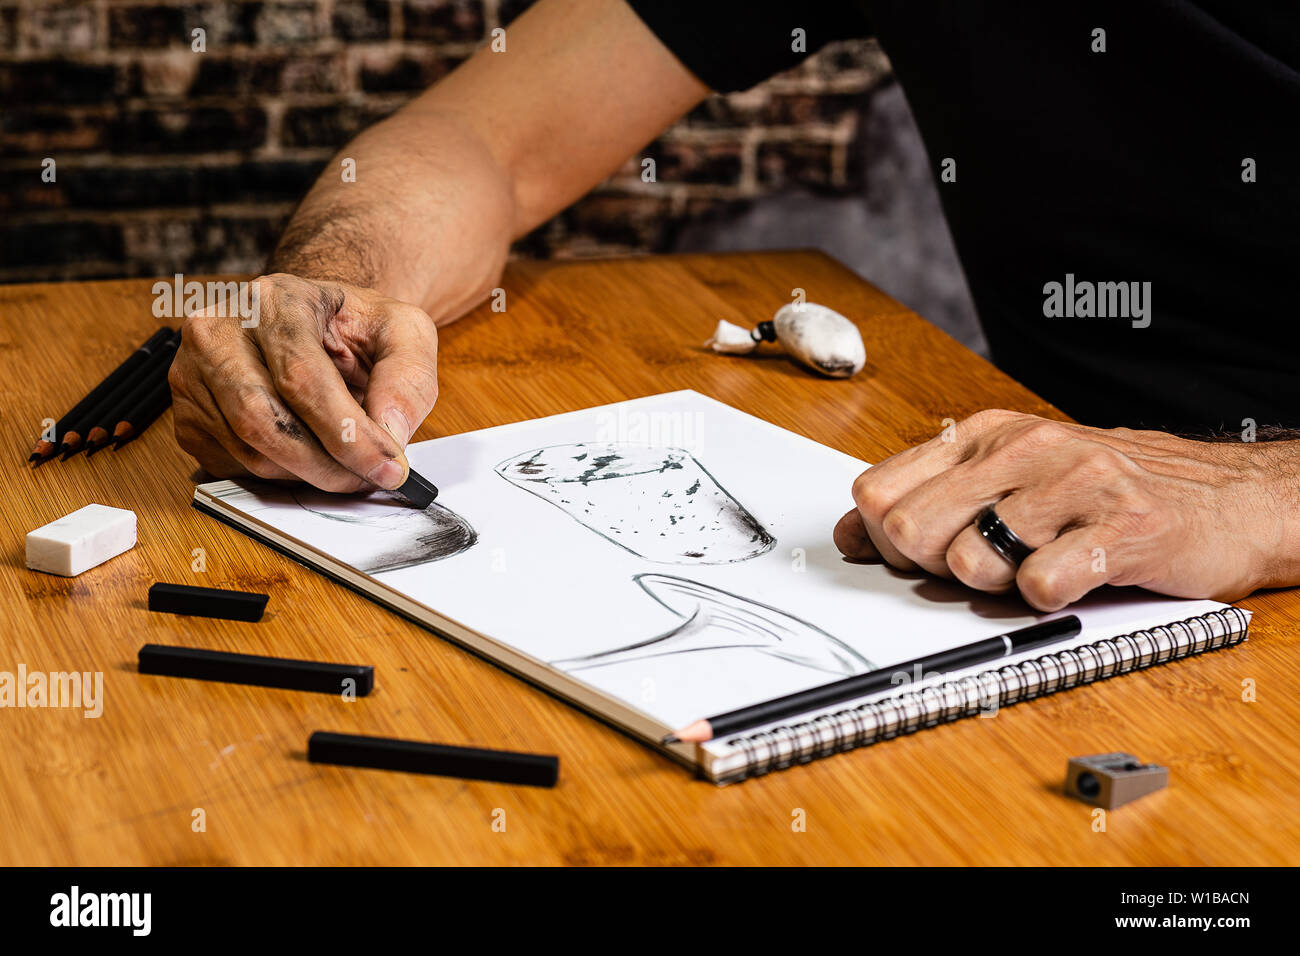 An Artist Sketching a wine bottle, wine glass and a cork at a work table in their studio using pencils and charcoals. Stock Photo